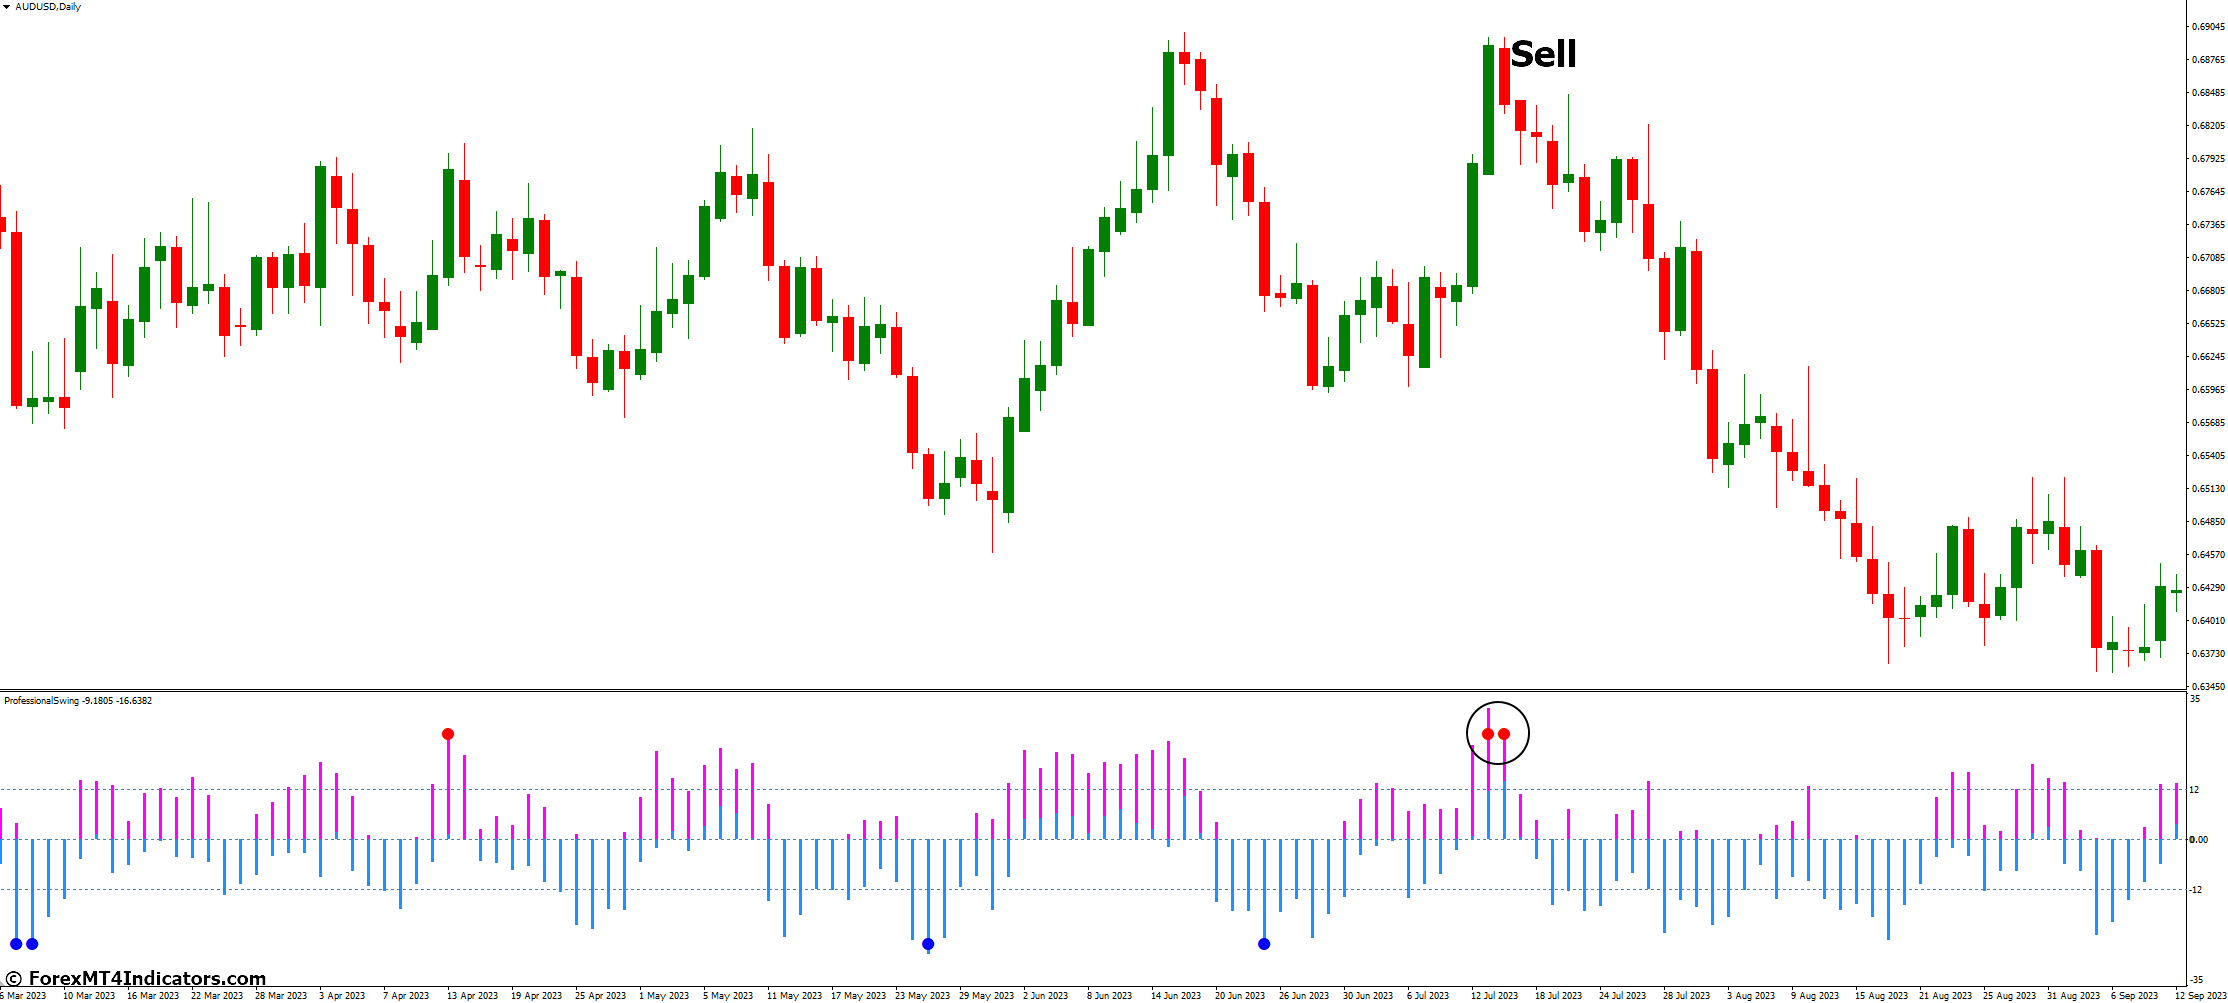 How to Trade with Professional Swing MT4 Indicator - Sell Entry